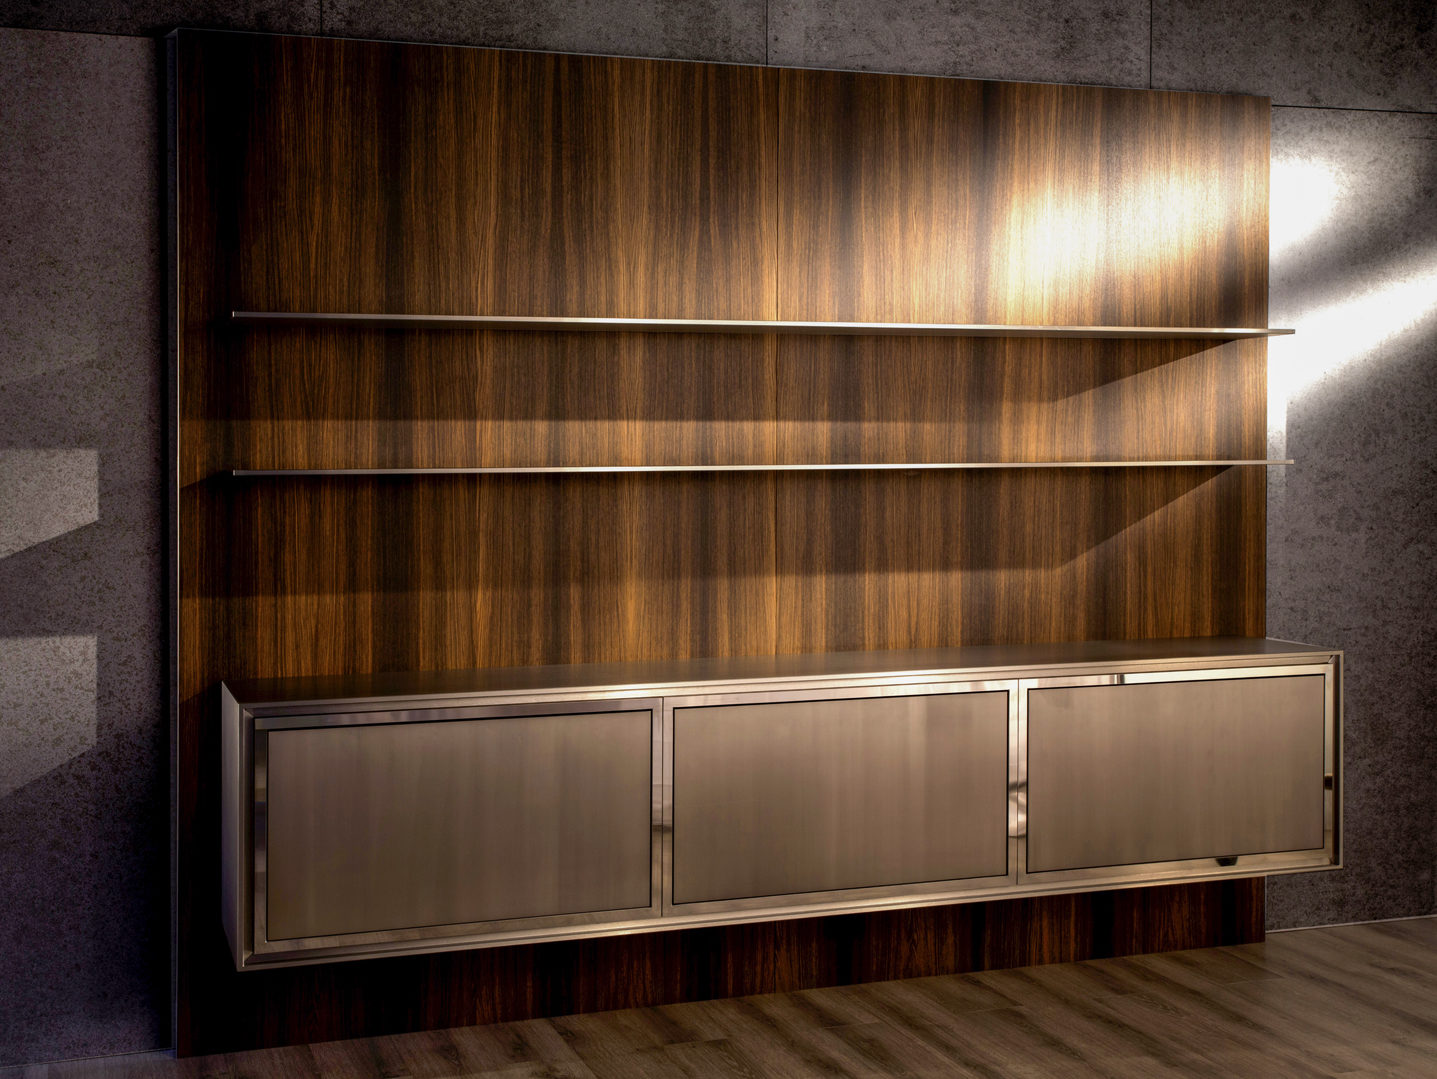 Strato_design_bespoke suspended cabinet_stainless steel mat_mirror stainless steel_Noce Canaletto wood_02